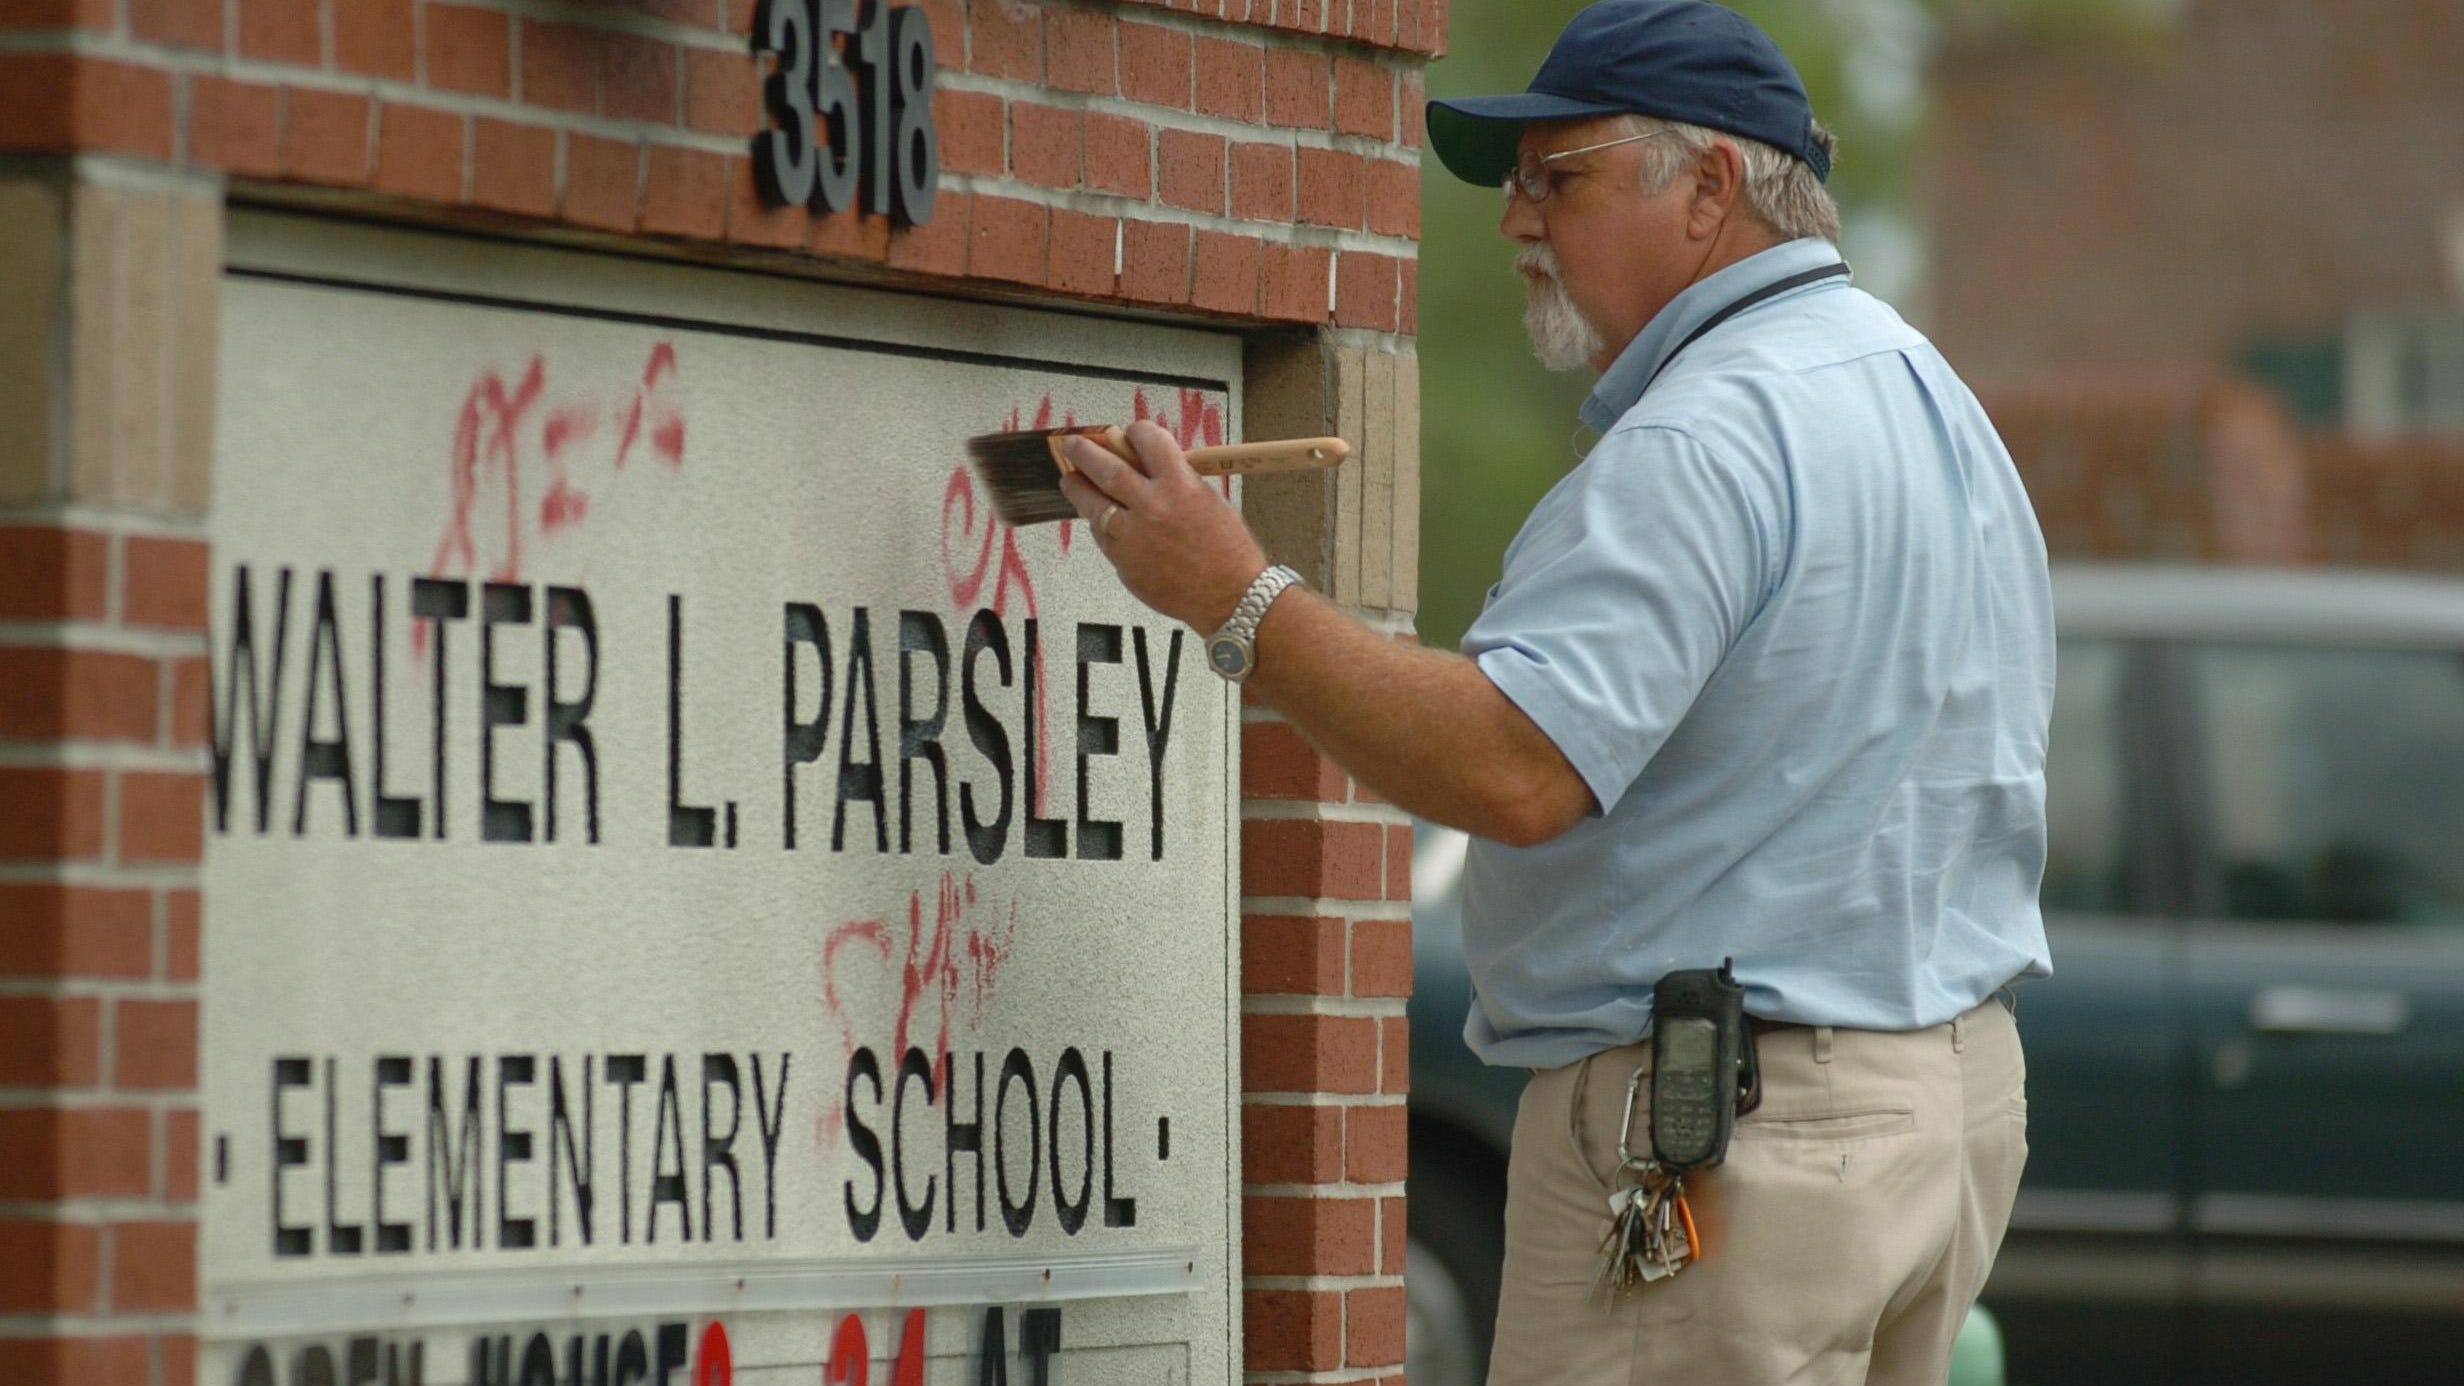  A school was named after a violent white supremacist. For years no one knew who he was. 